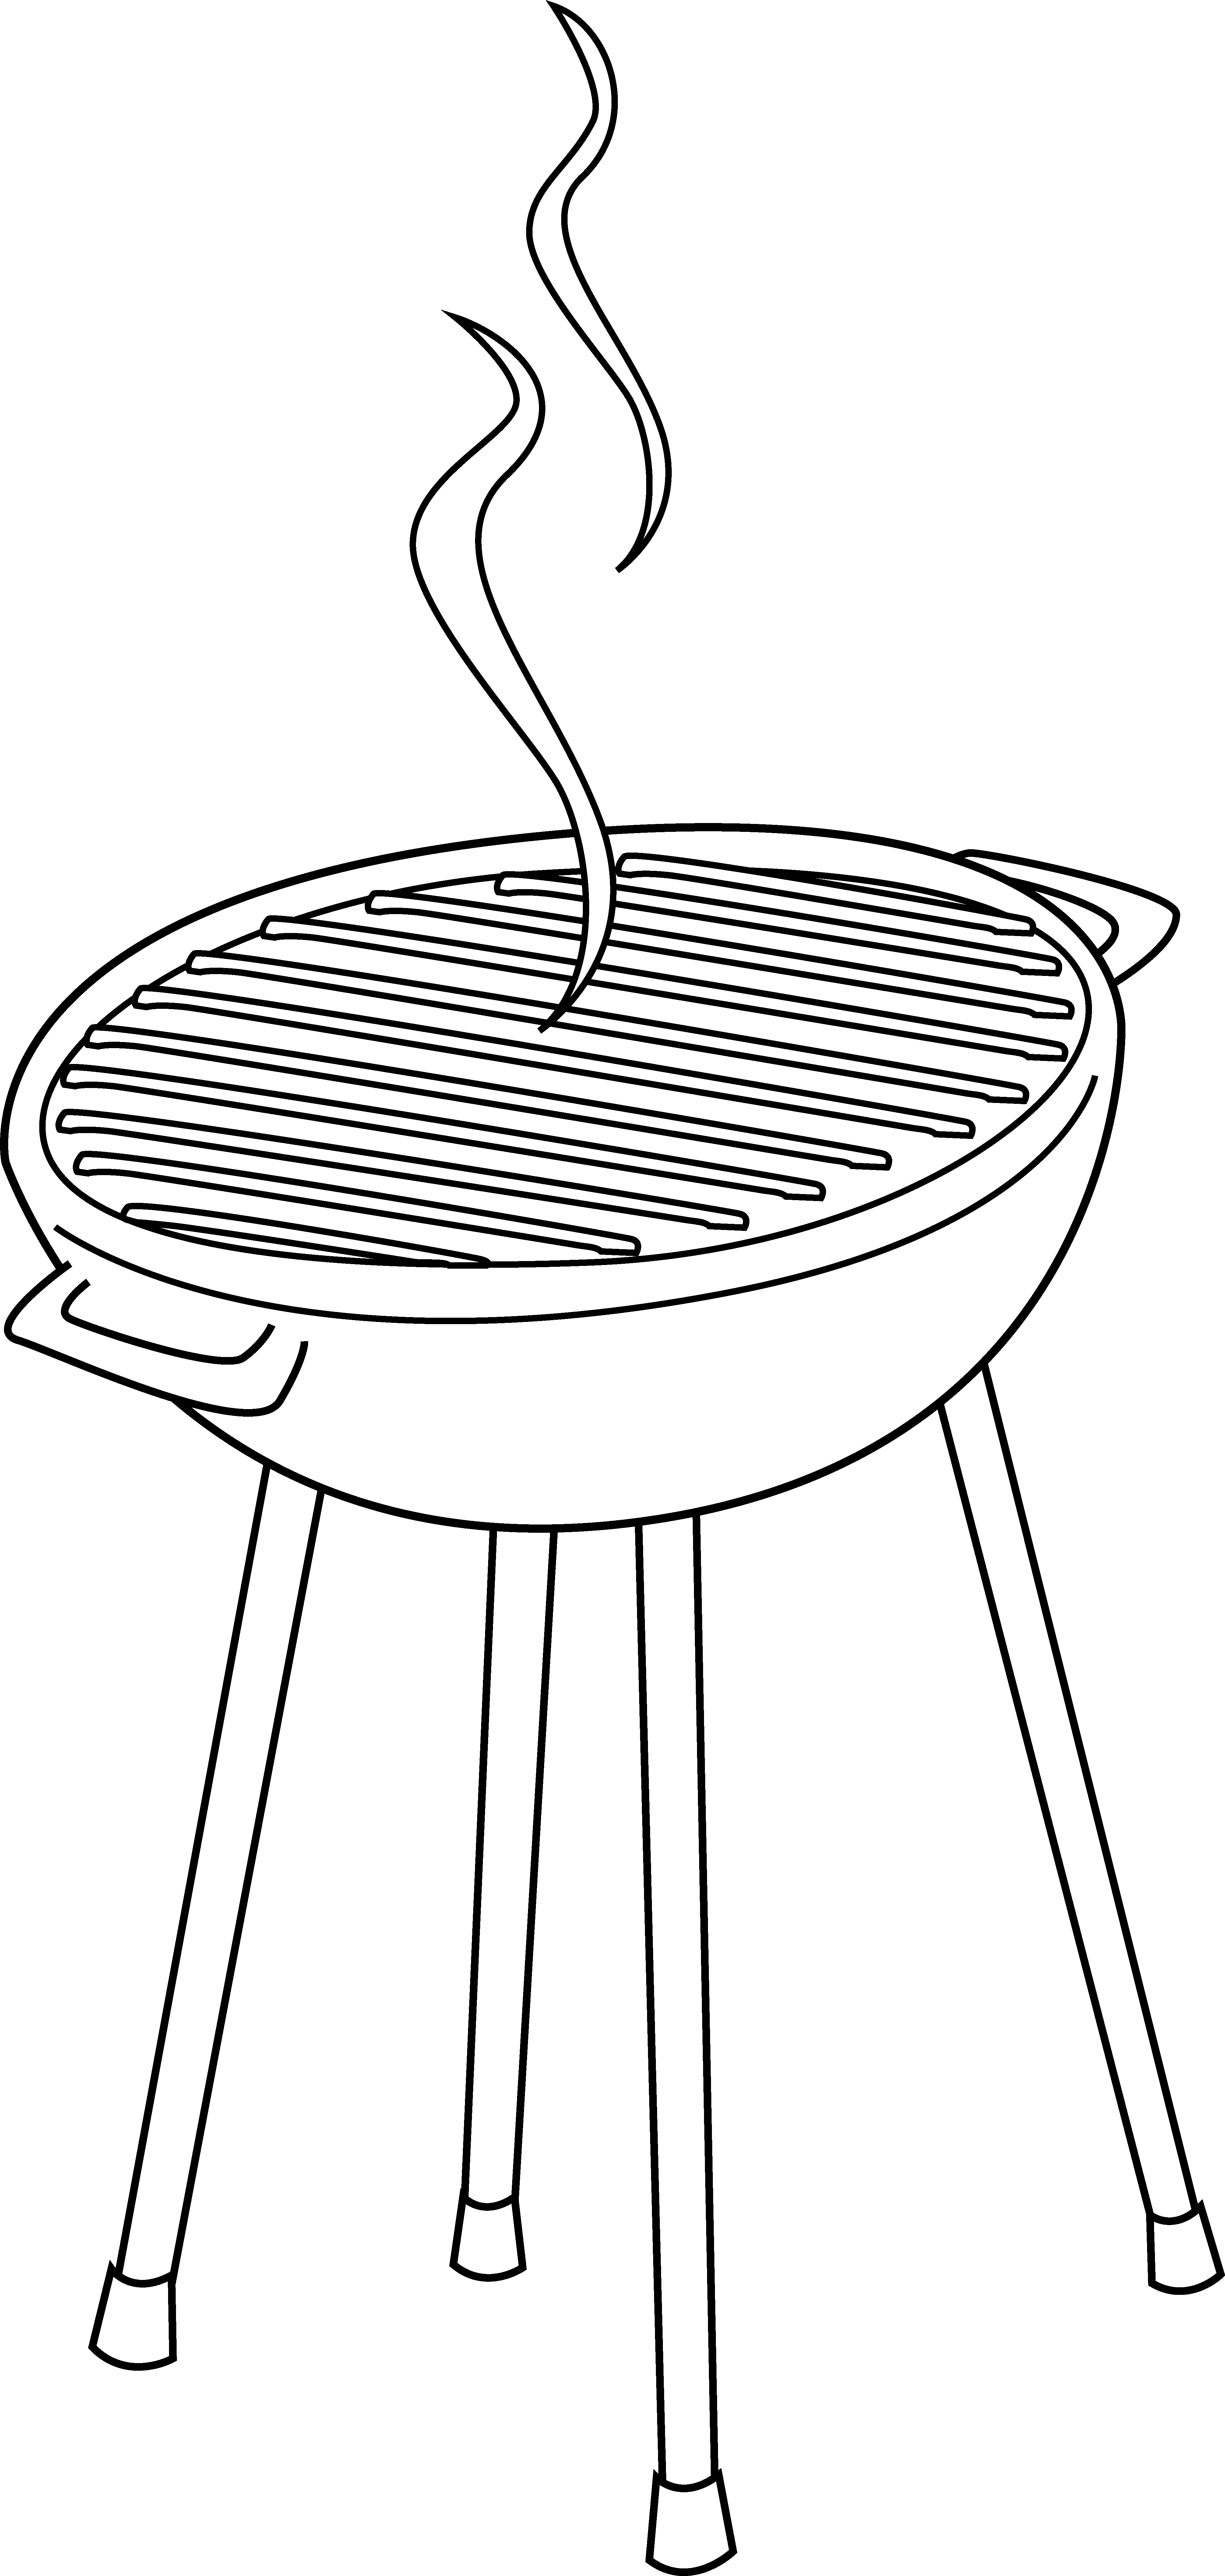 Words clipart bbq.  collection of black